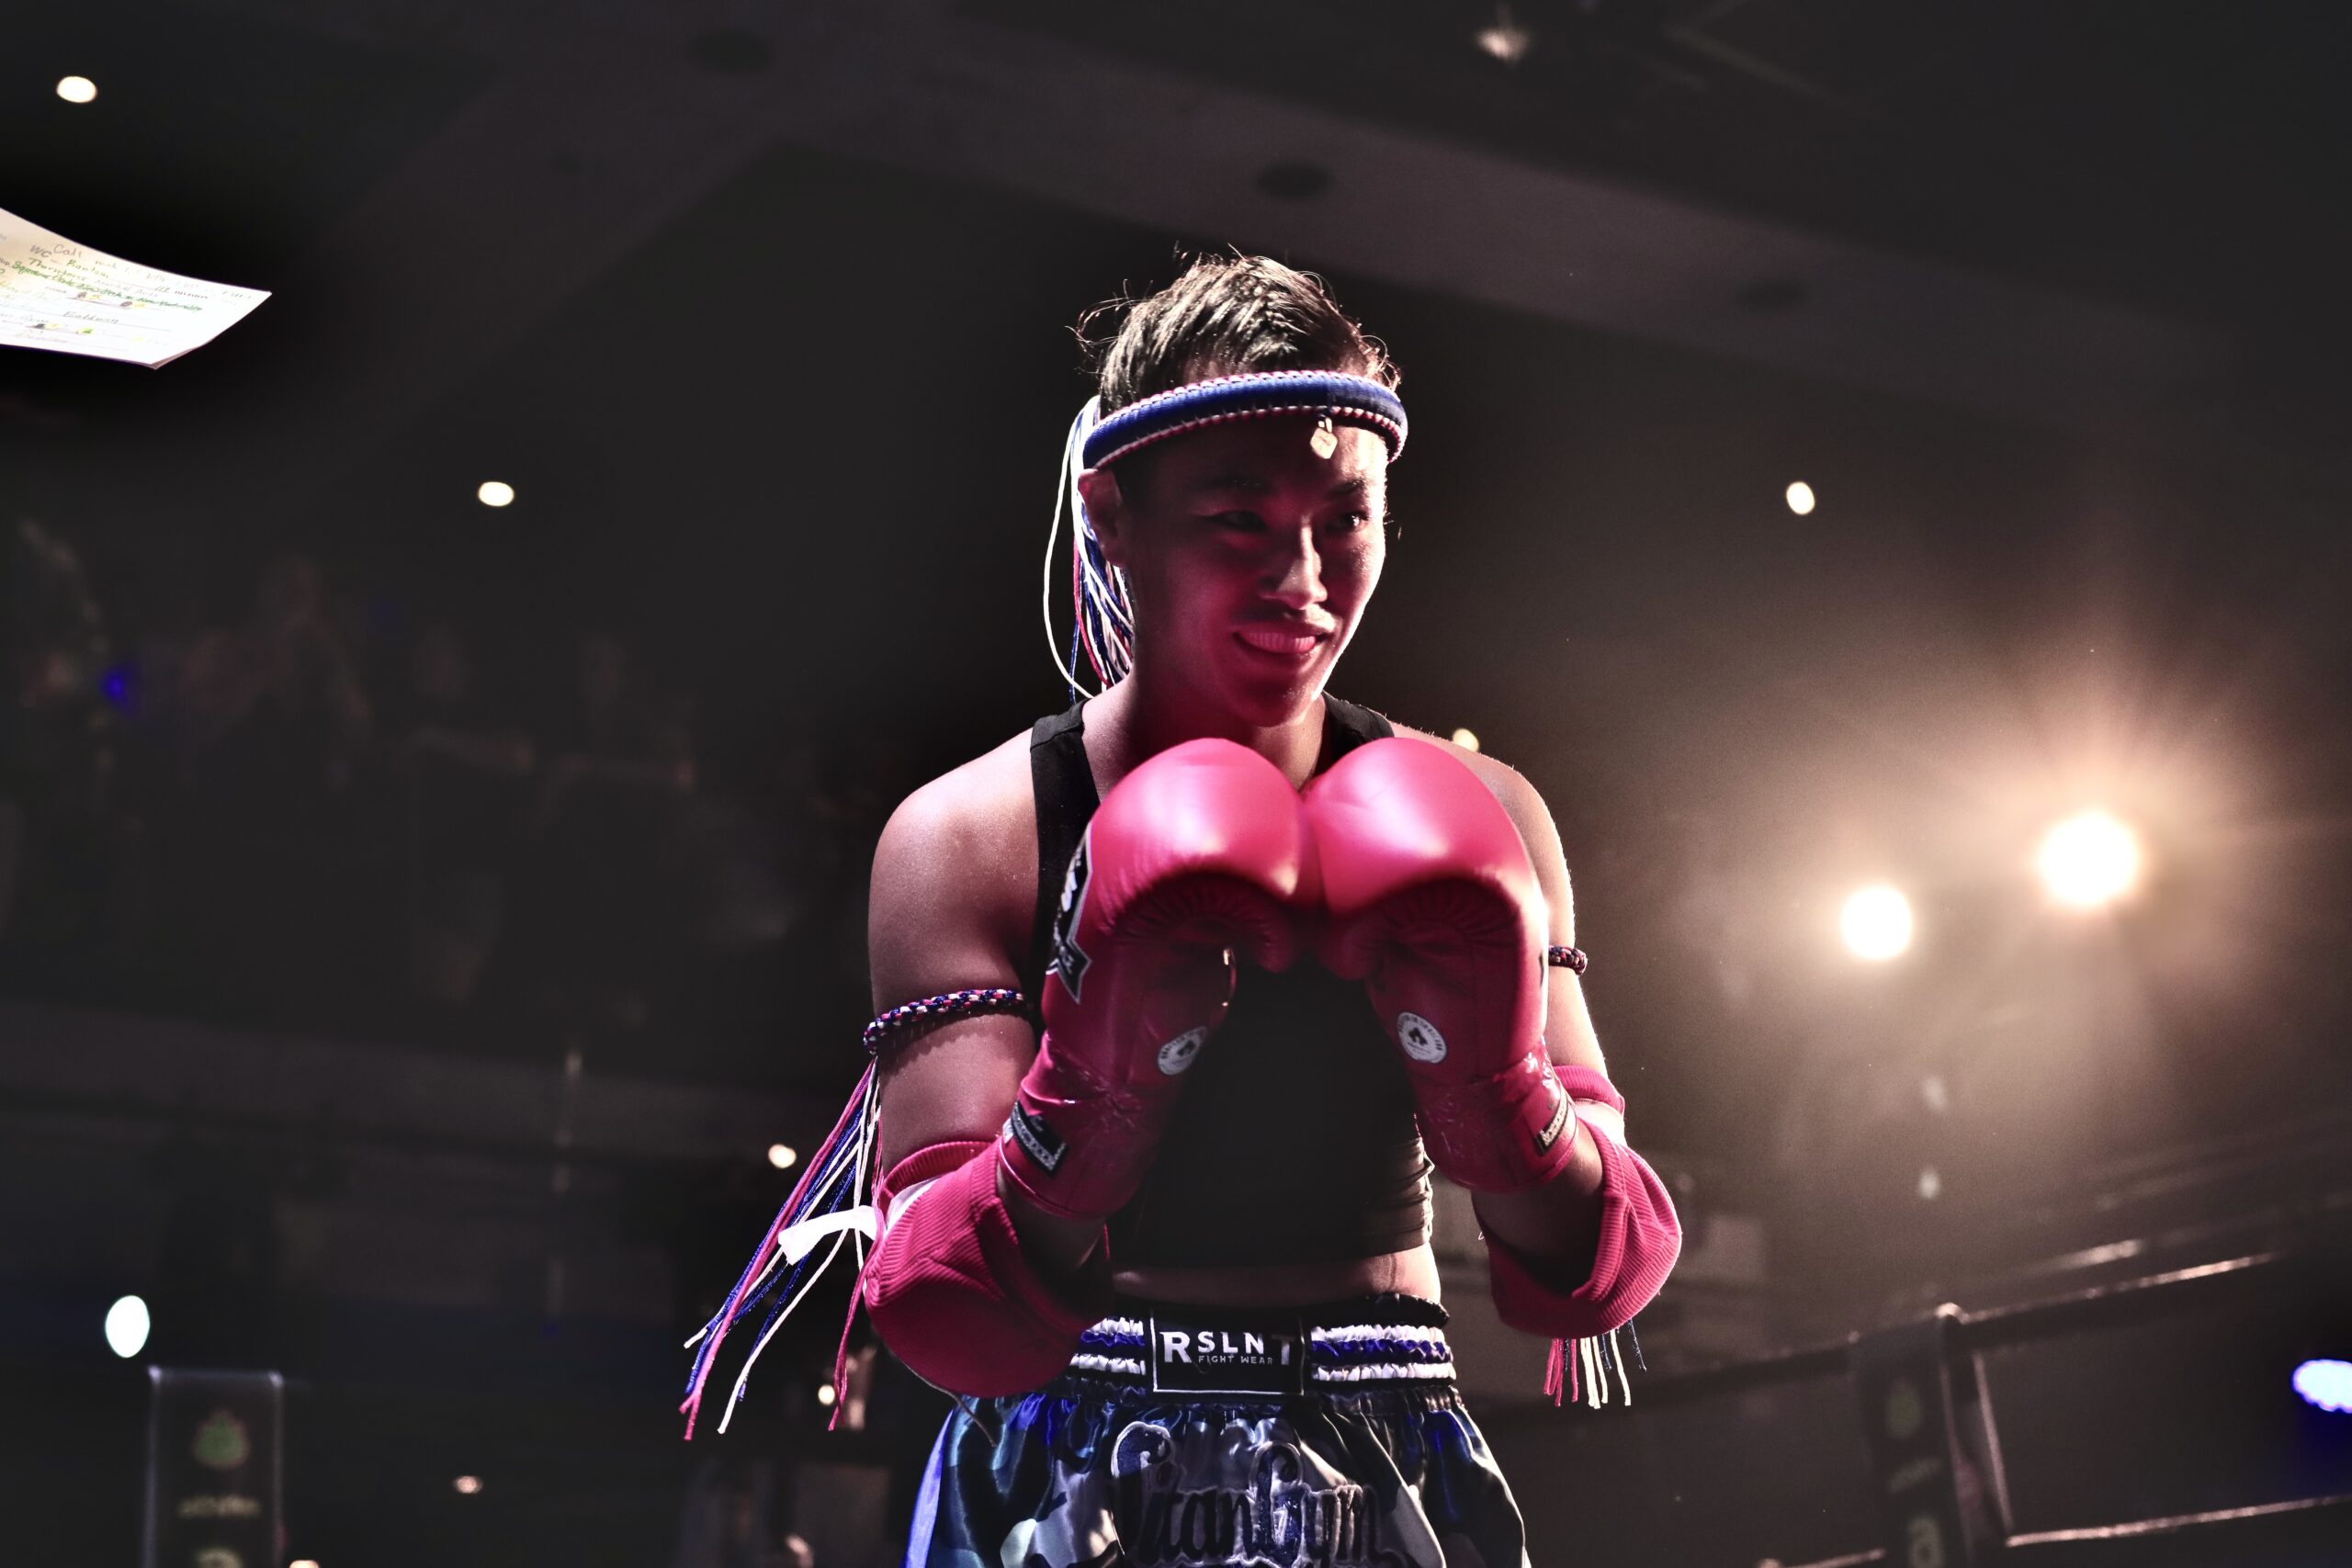 Muay Thai Photography. The fighter bows before the fight